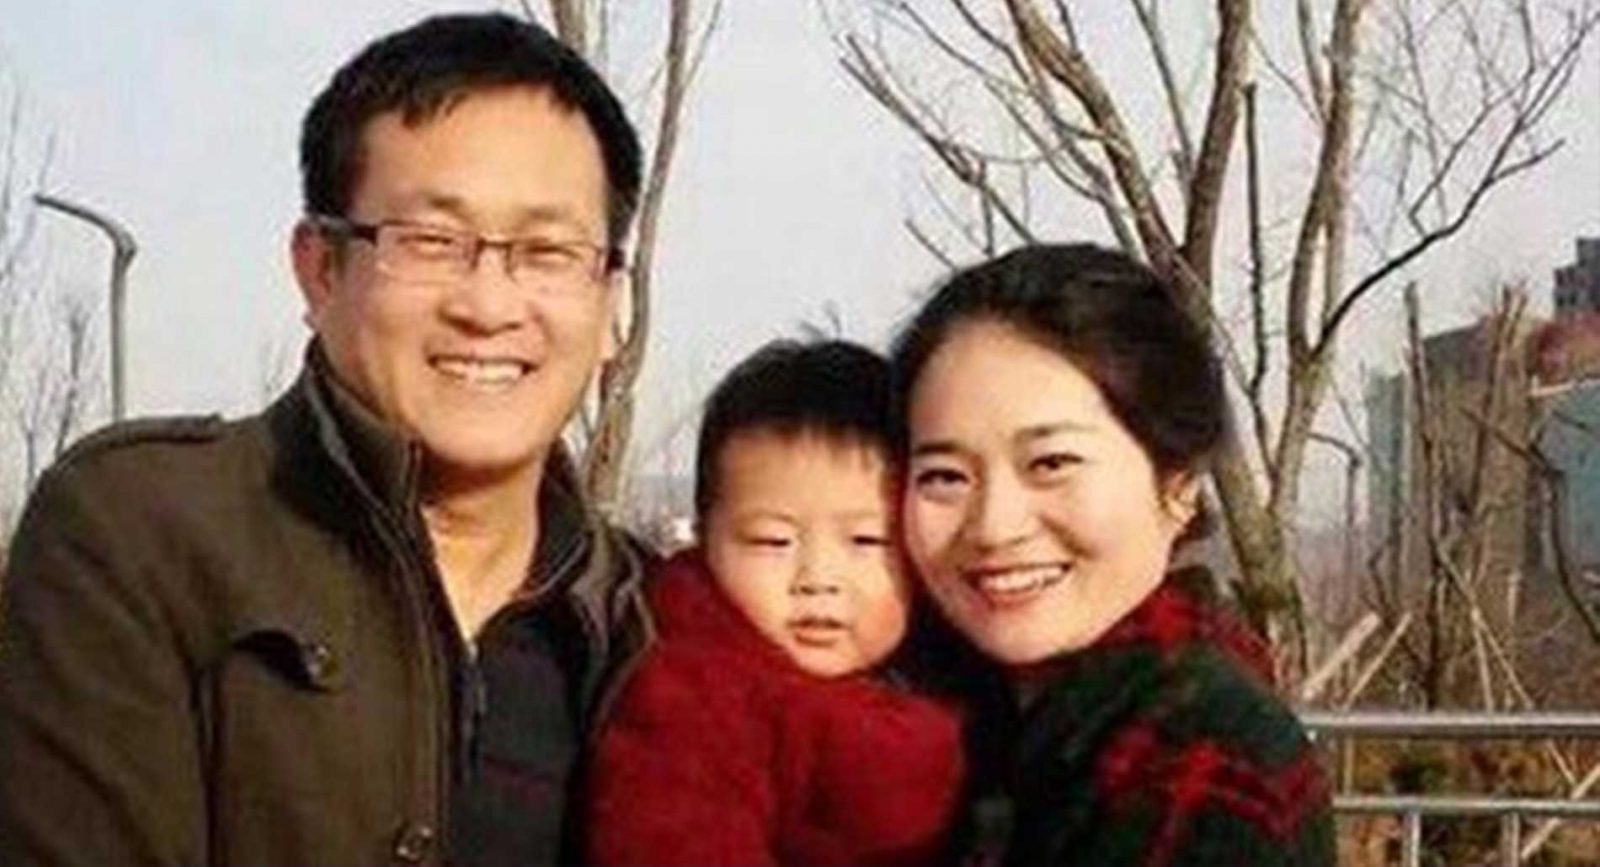 Wang Quanzhang with his wife and son © Private